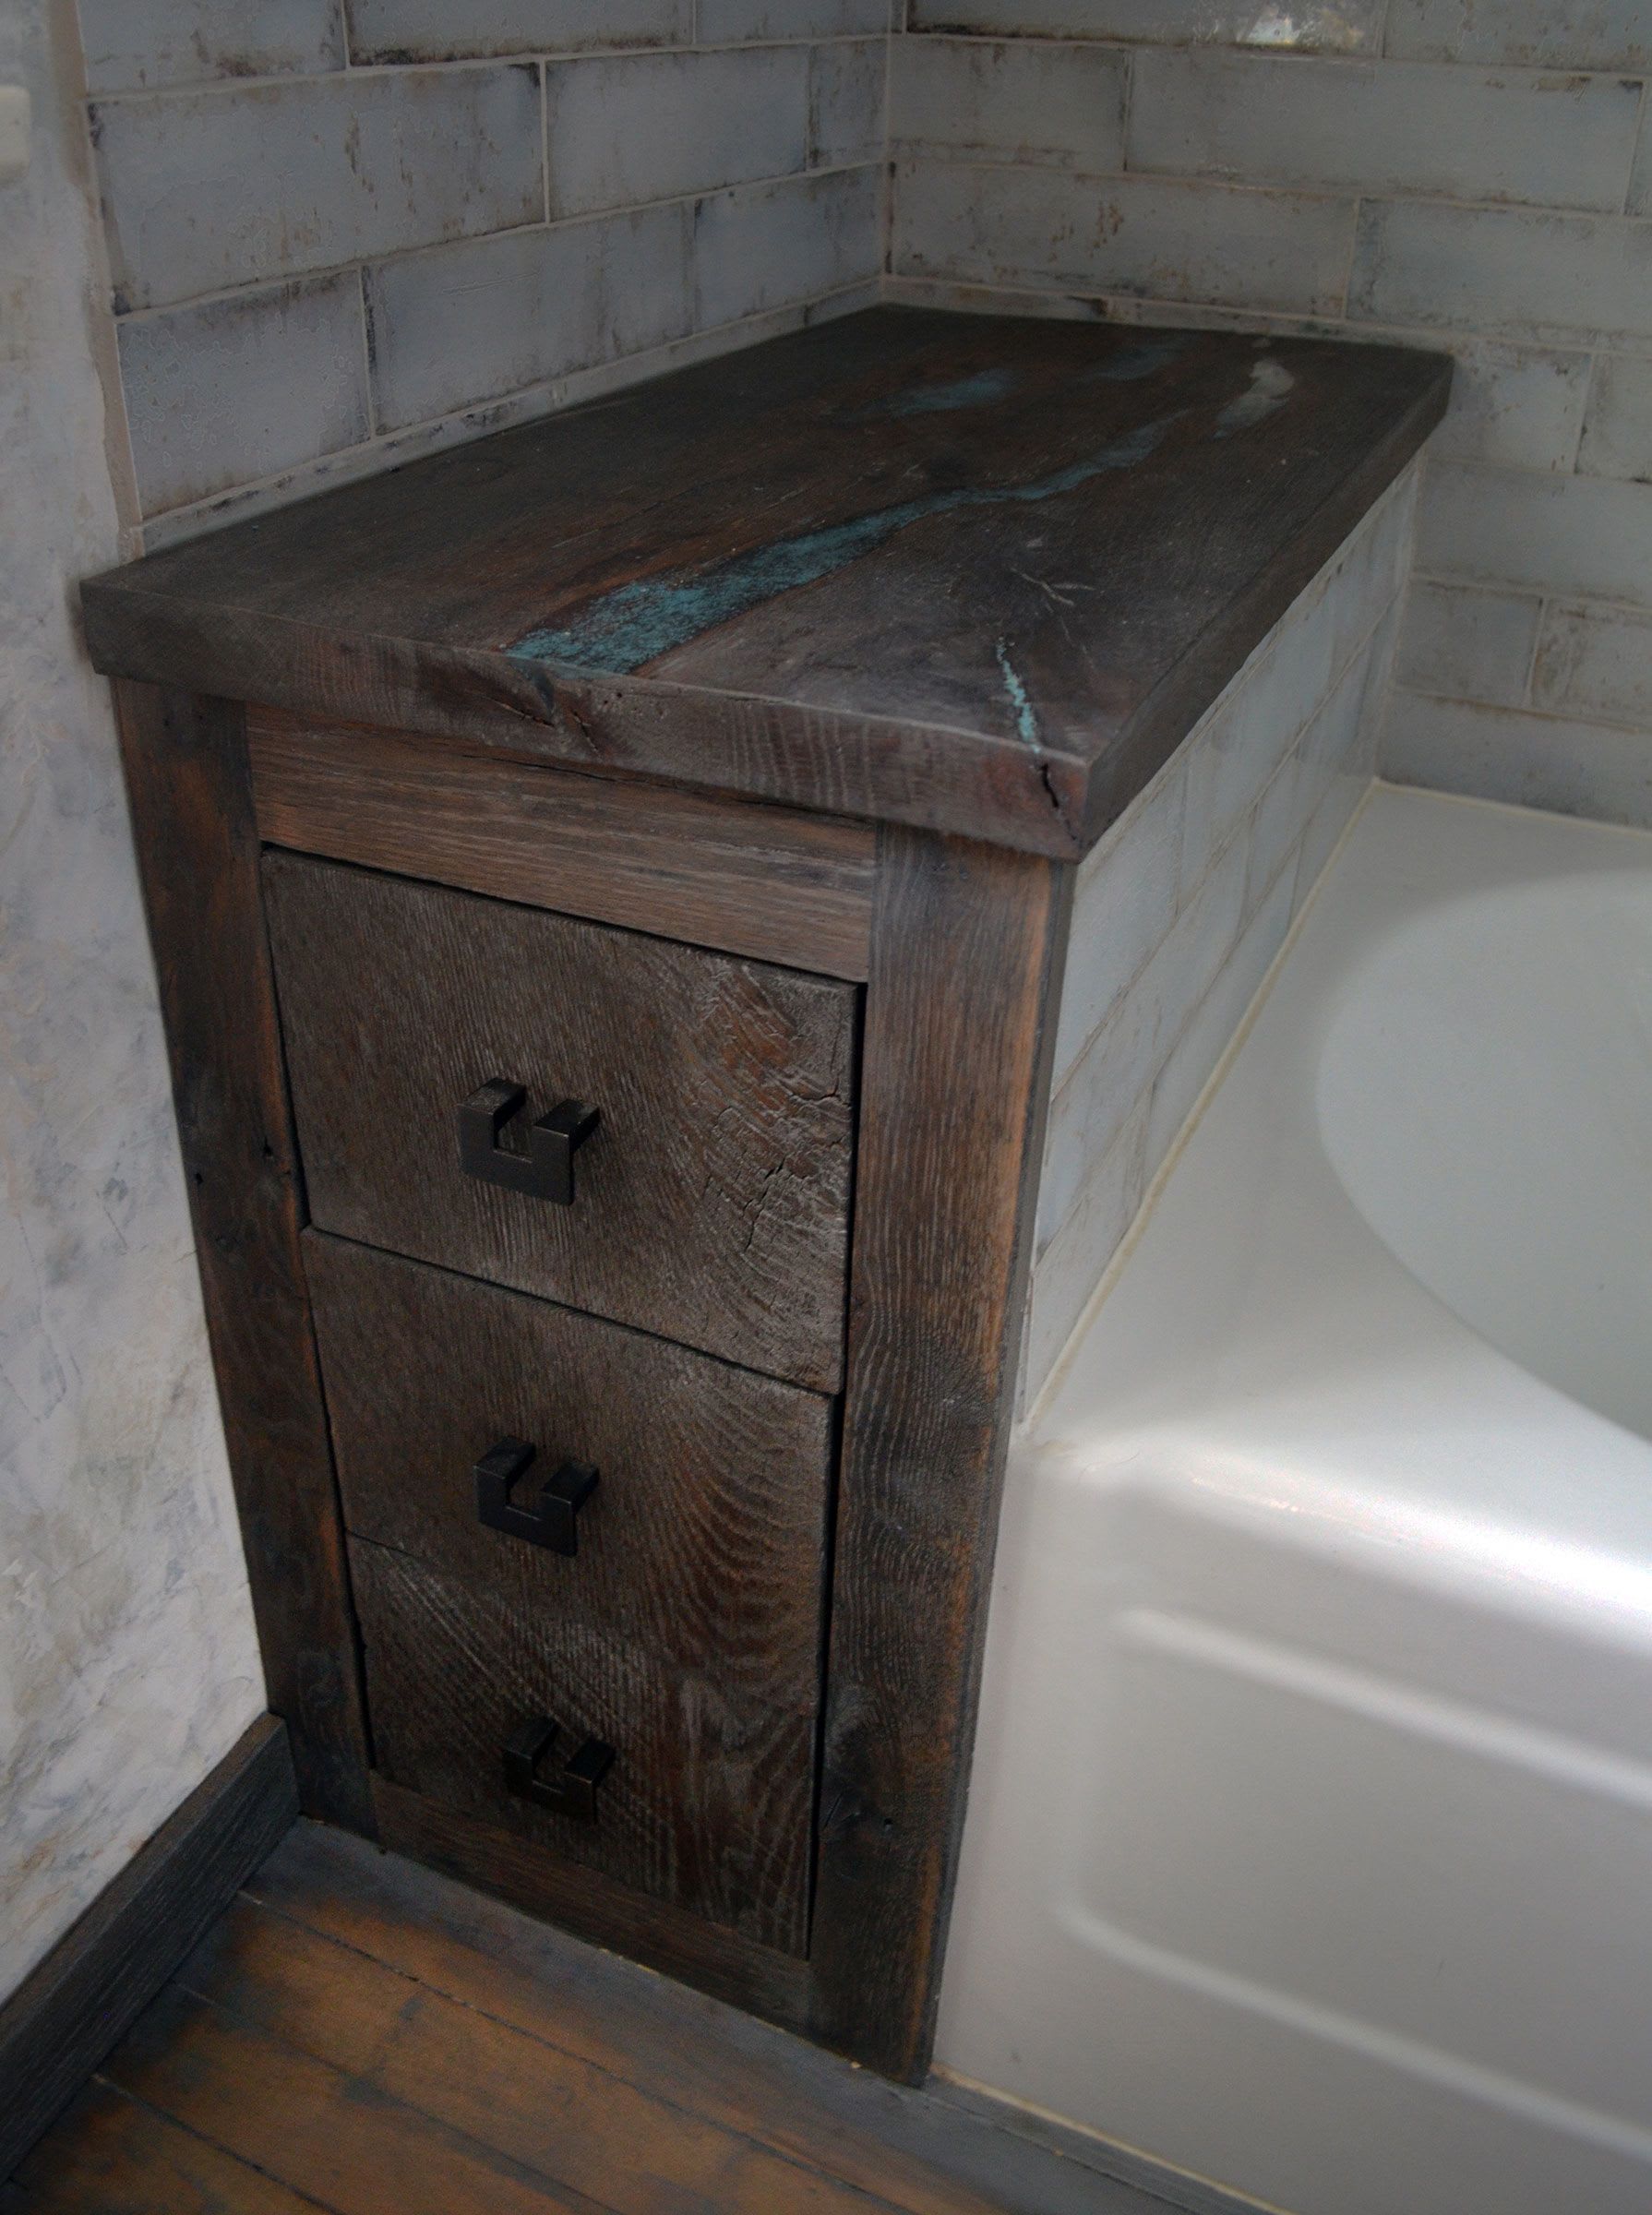 Rustic wood bathroom accessories by Abodeacious